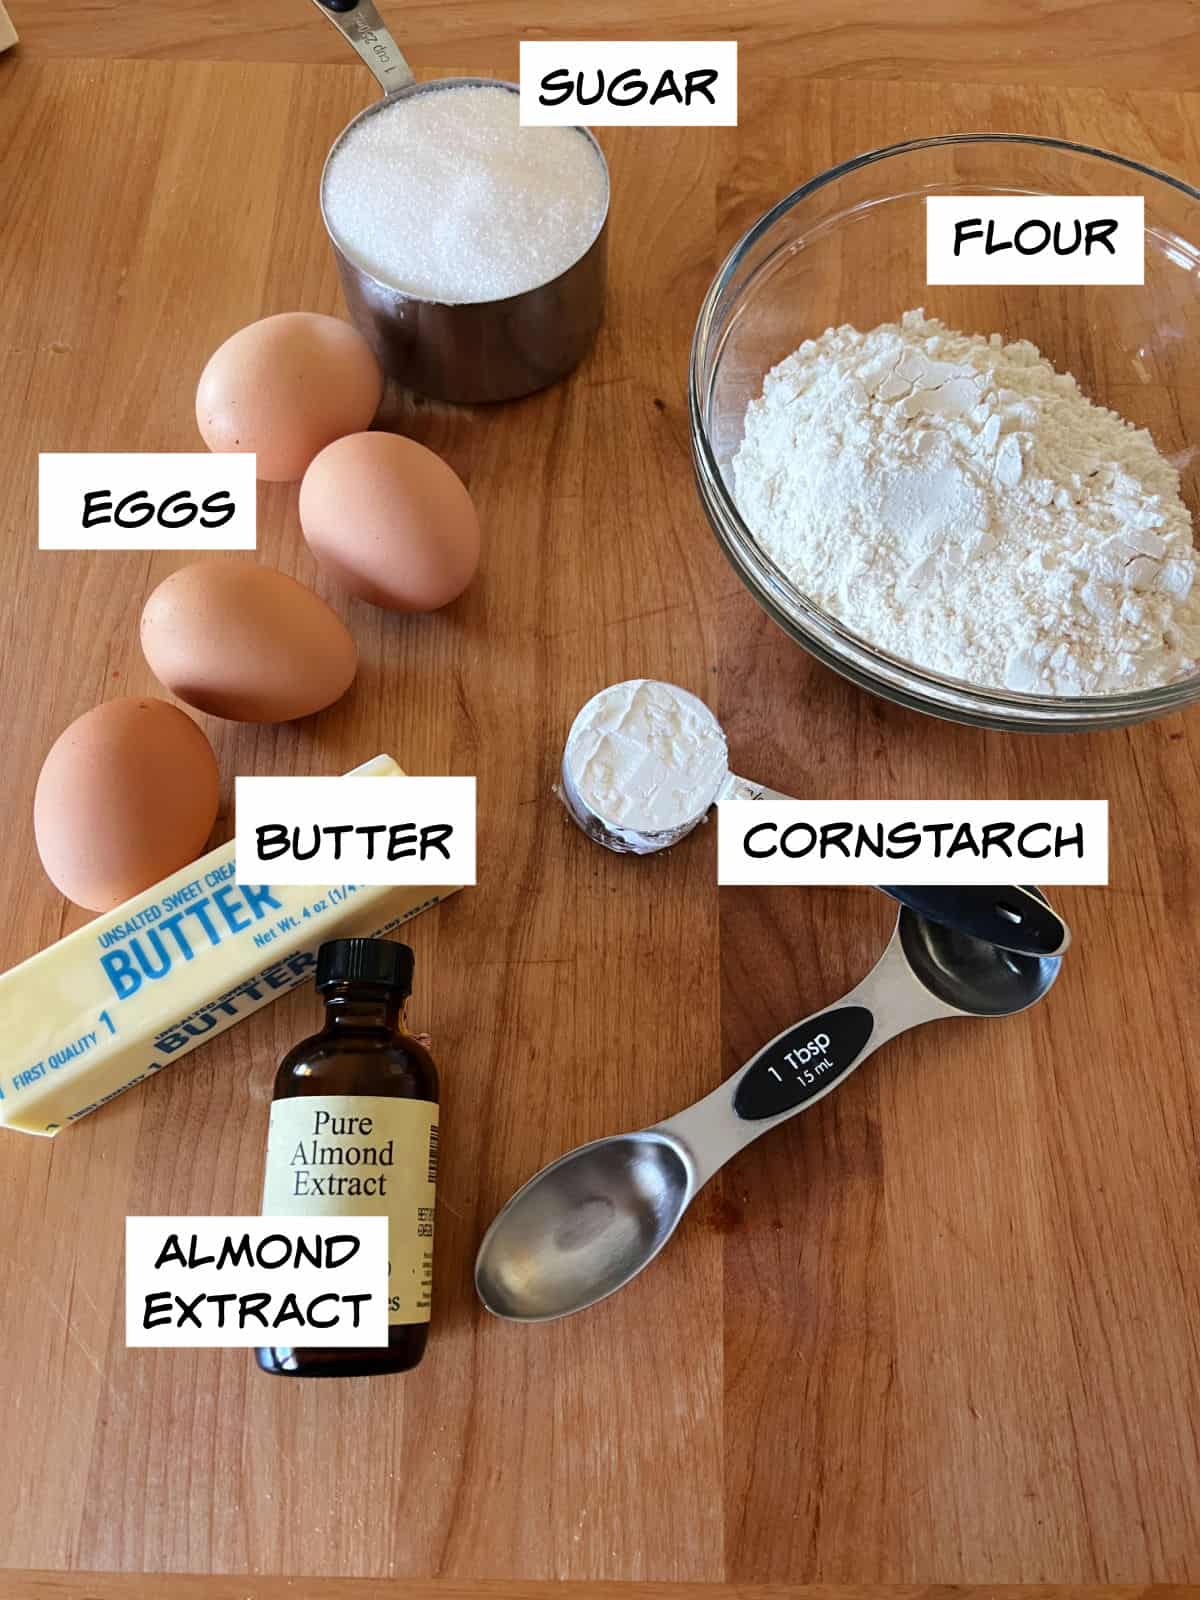 ingredients: eggs, flour, sugar, cornstarch, butter, and almond extract.